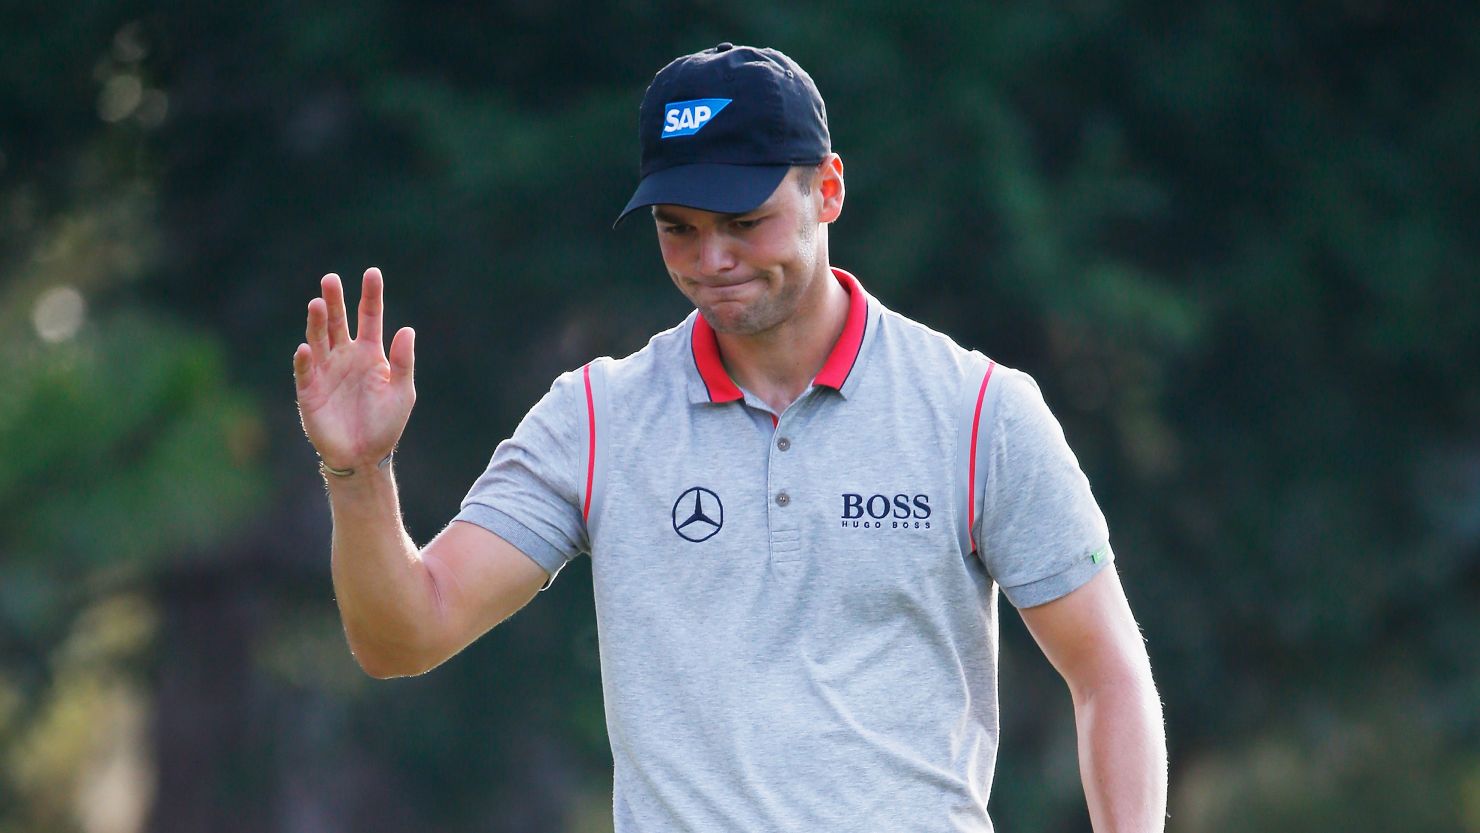 Martin Kaymer makes birdie on the third hole during the second round of The Players Championship .